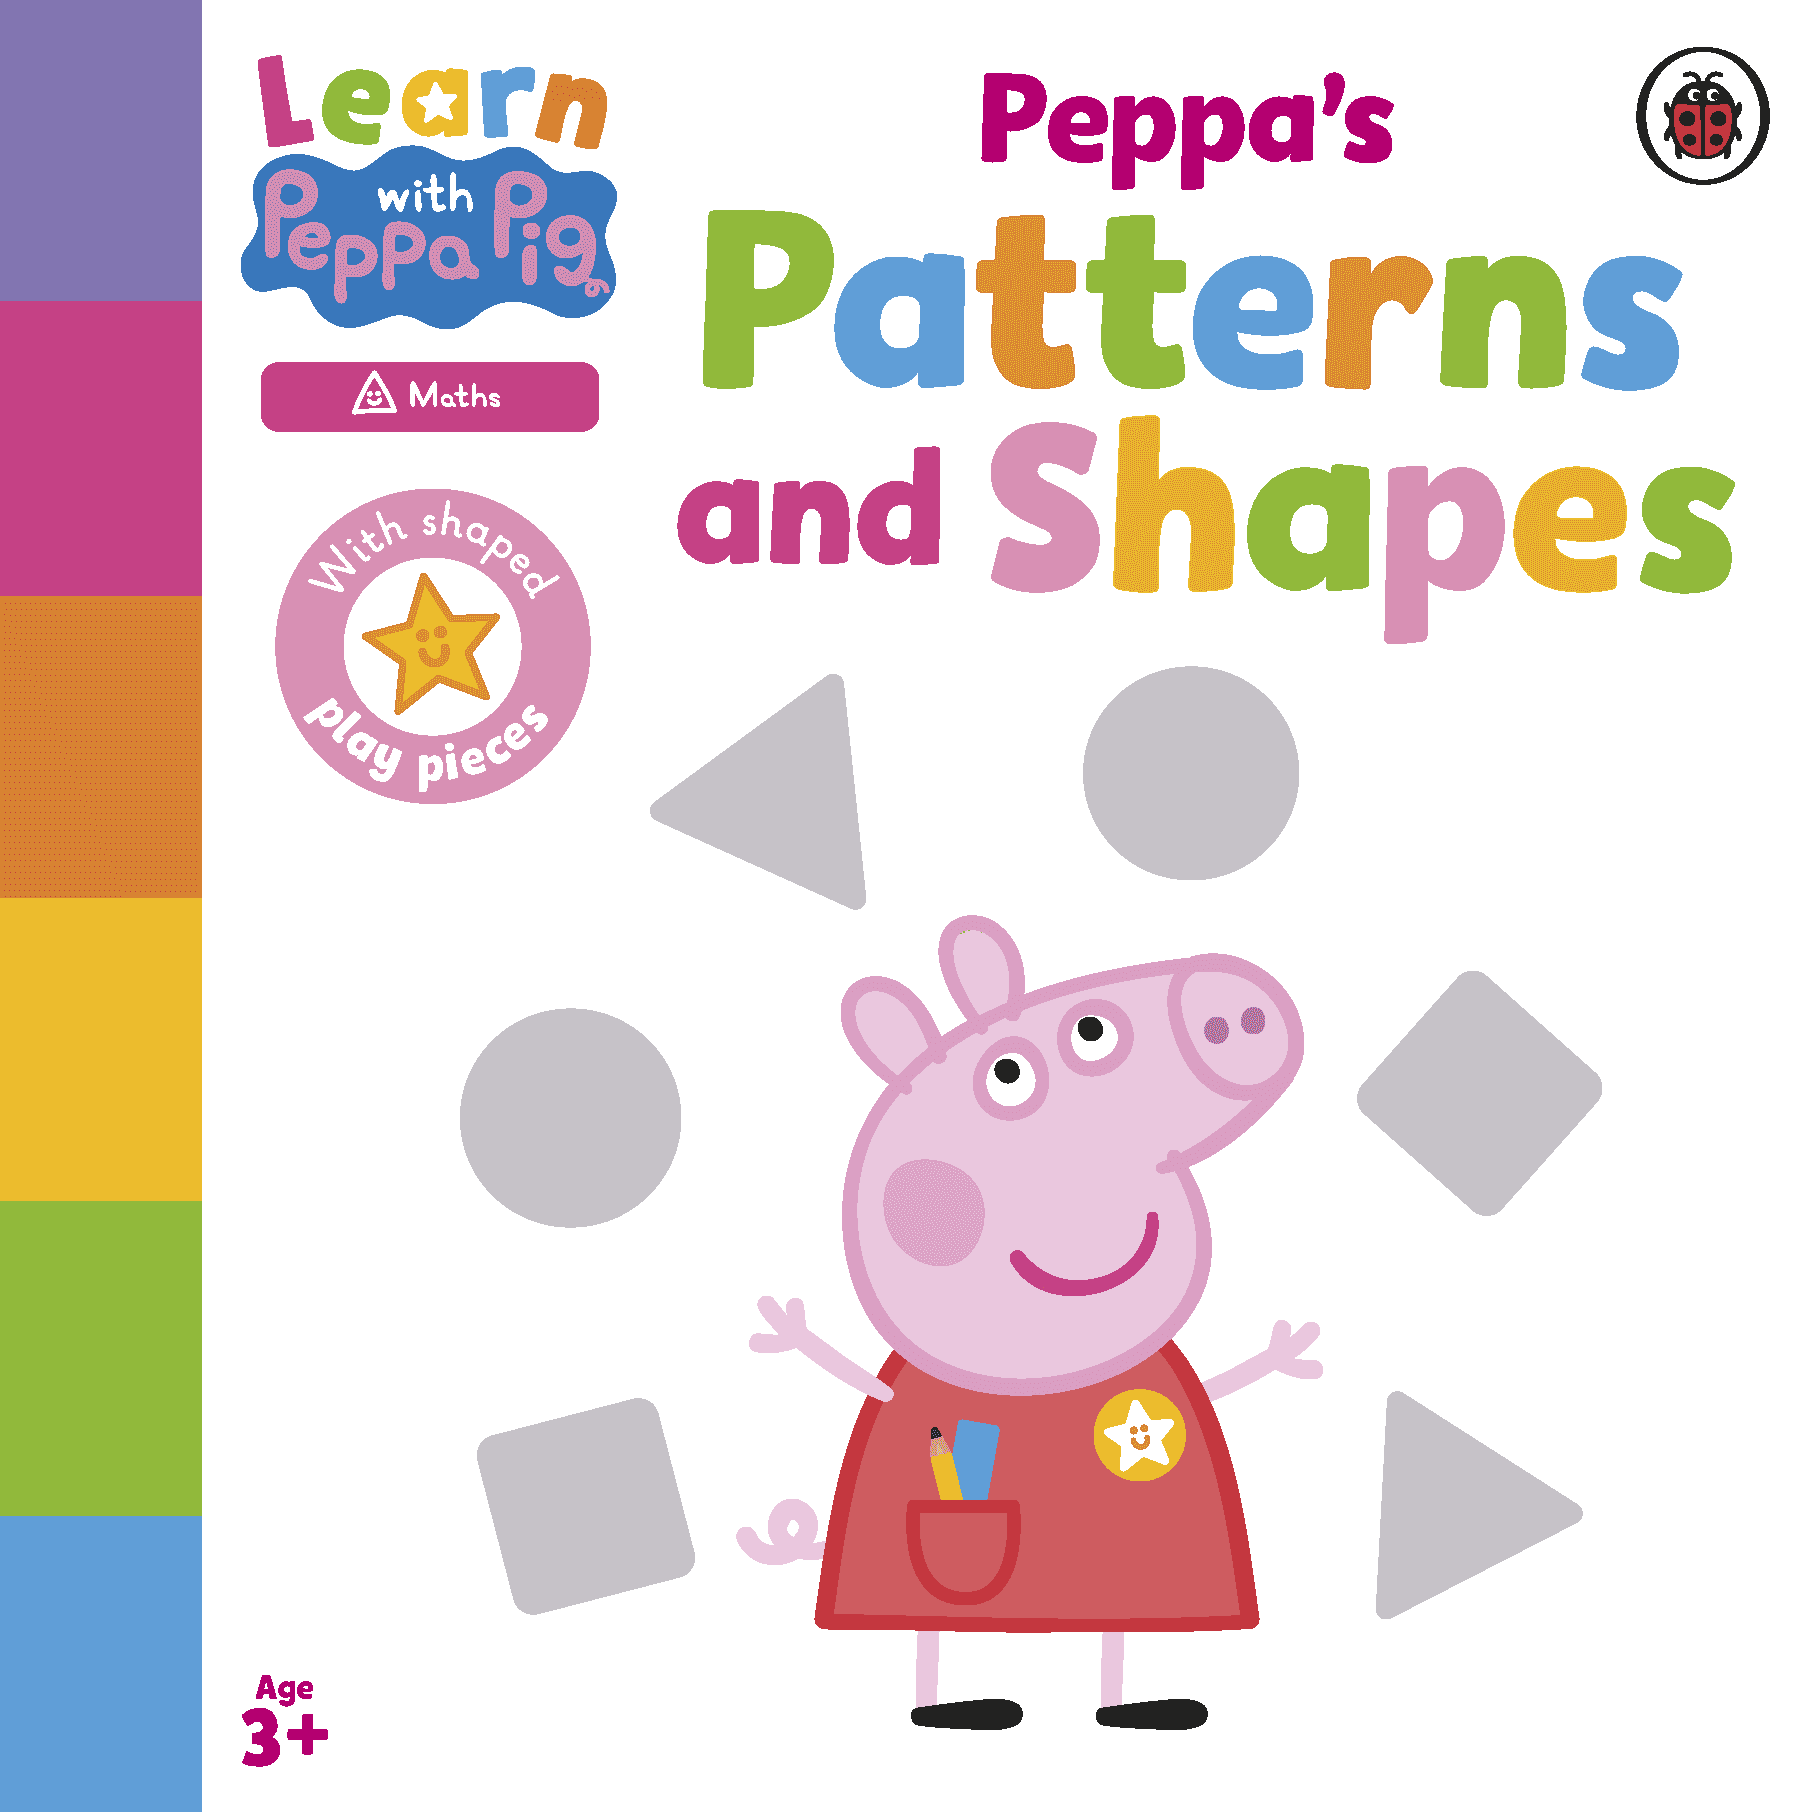 Peppa's Patterns and Shapes